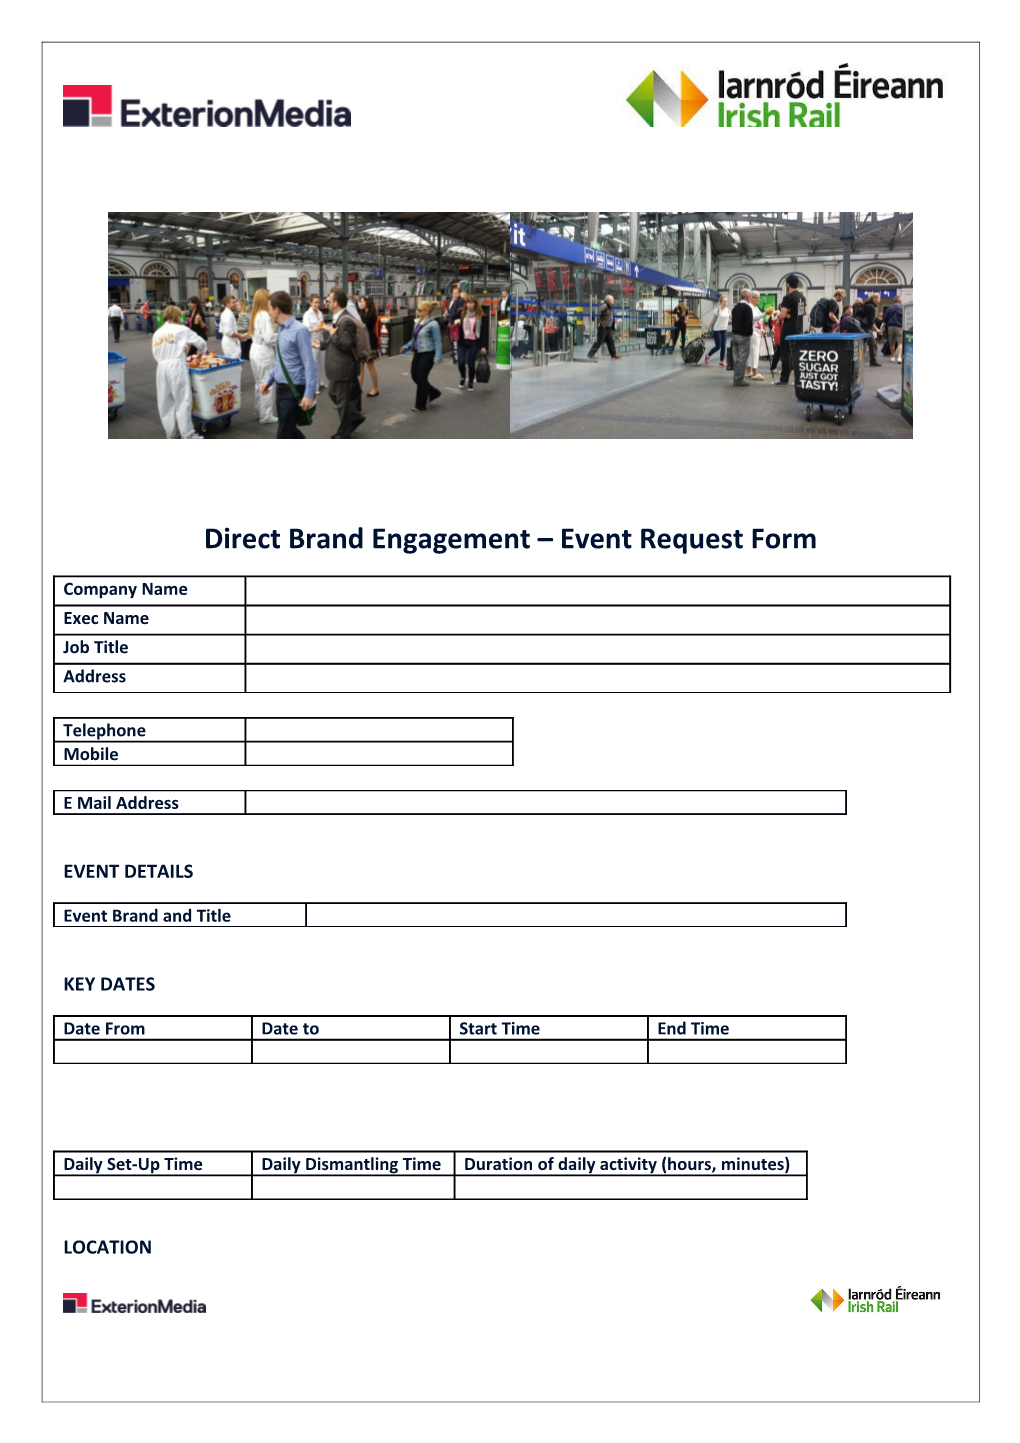 Direct Brand Engagement Event Request Form